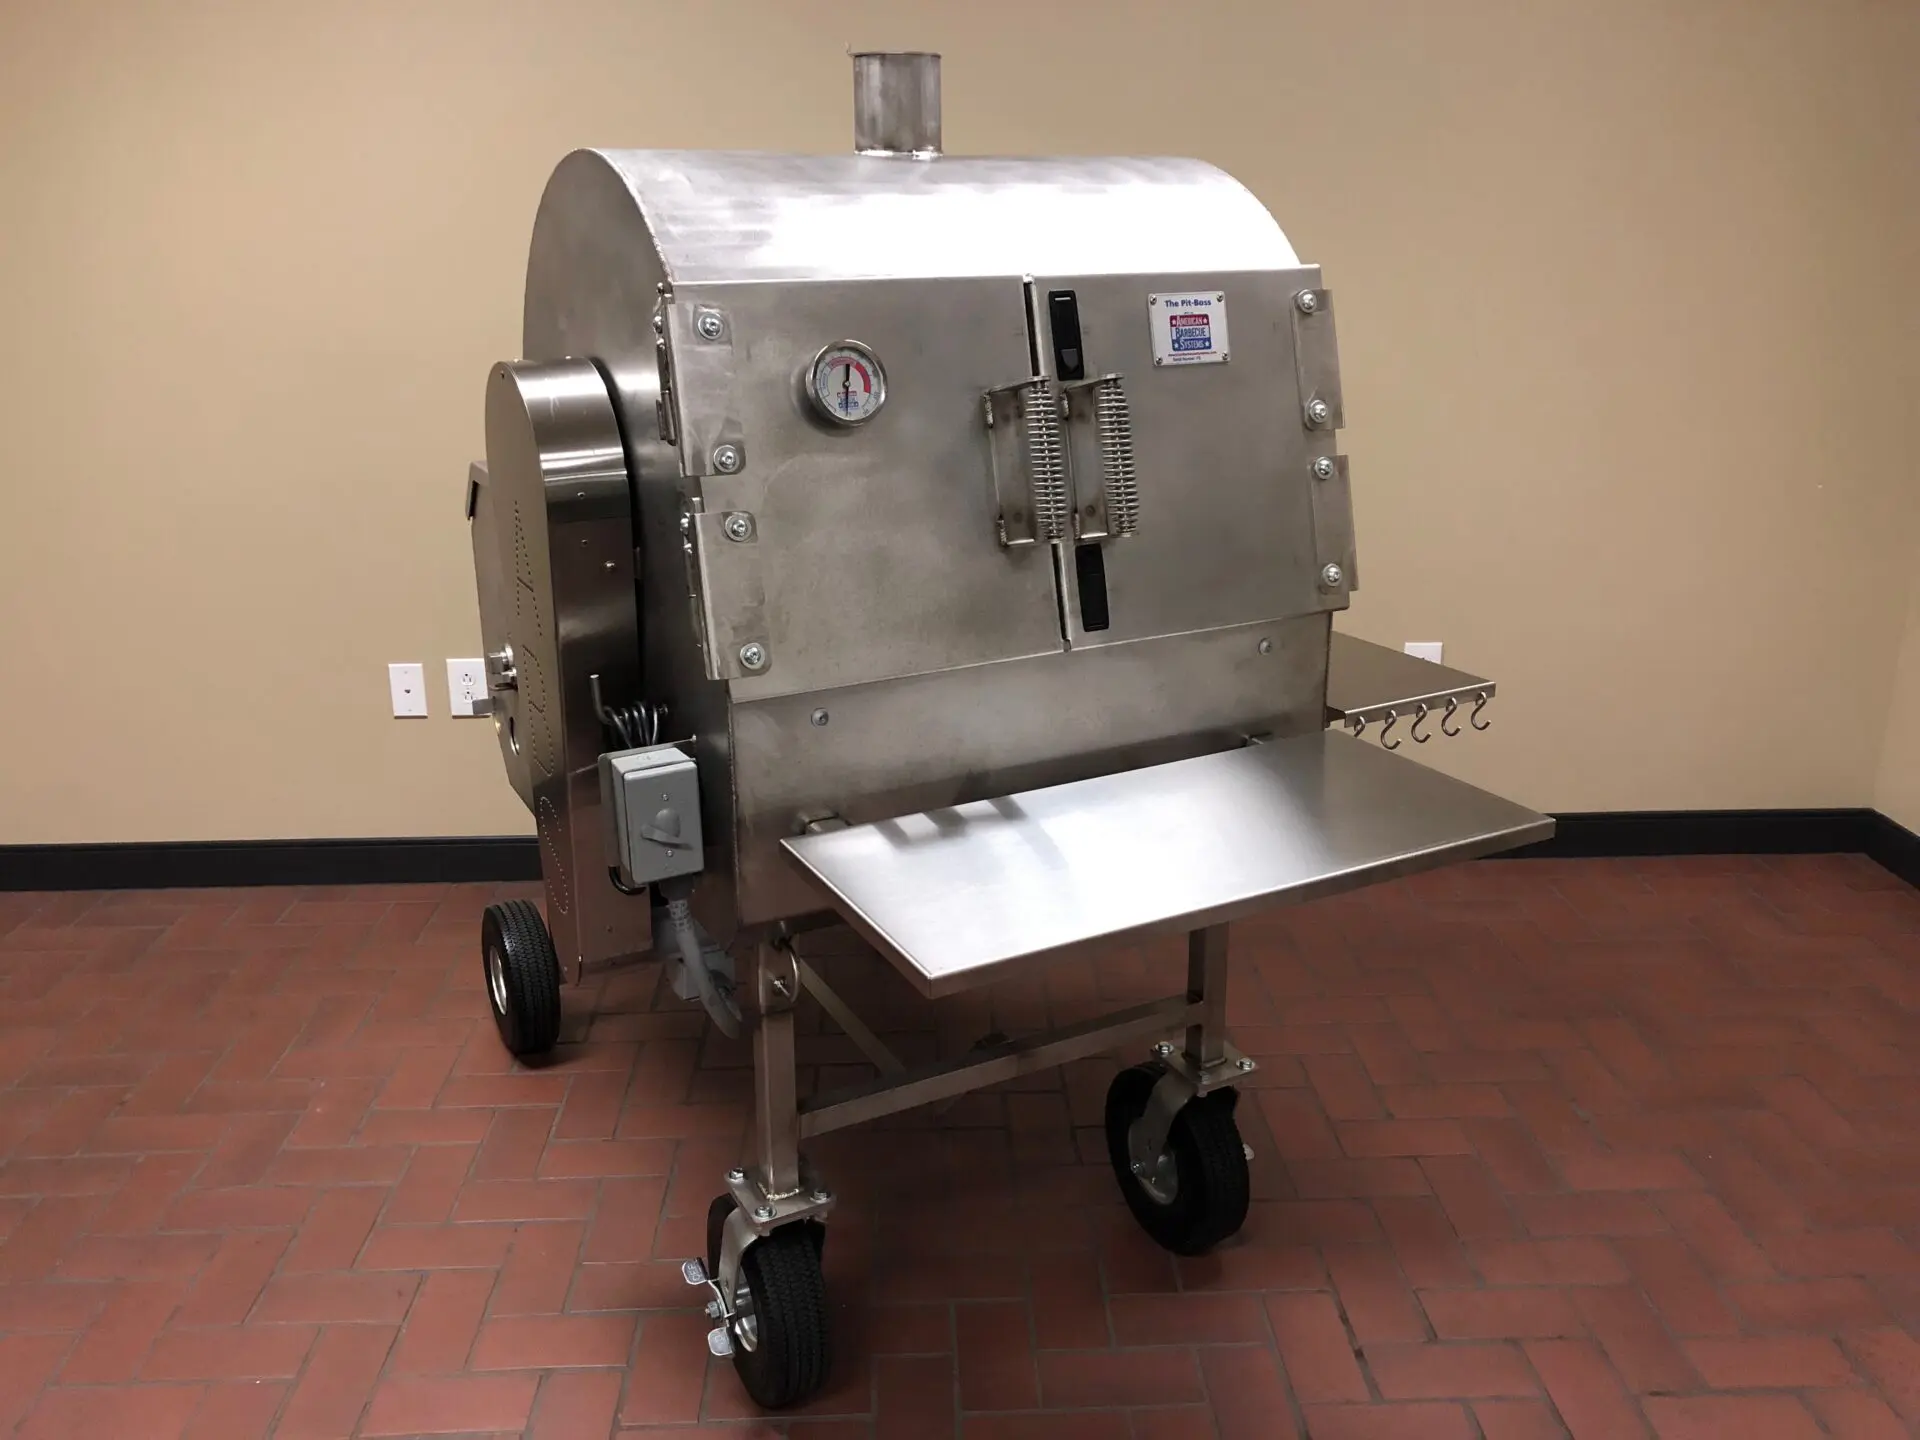 Grill and smoke bbq store, grills for sell near me, best smoke grill store near me, grills huntsville, judge 5ft near me, judge 4ft near me, pit boss near me, best smoker near me, best bbq sauce, best bbq rubs, high end grill, high end smoker, Patrick Pearson, 35805, 35816, 35759, 35601,